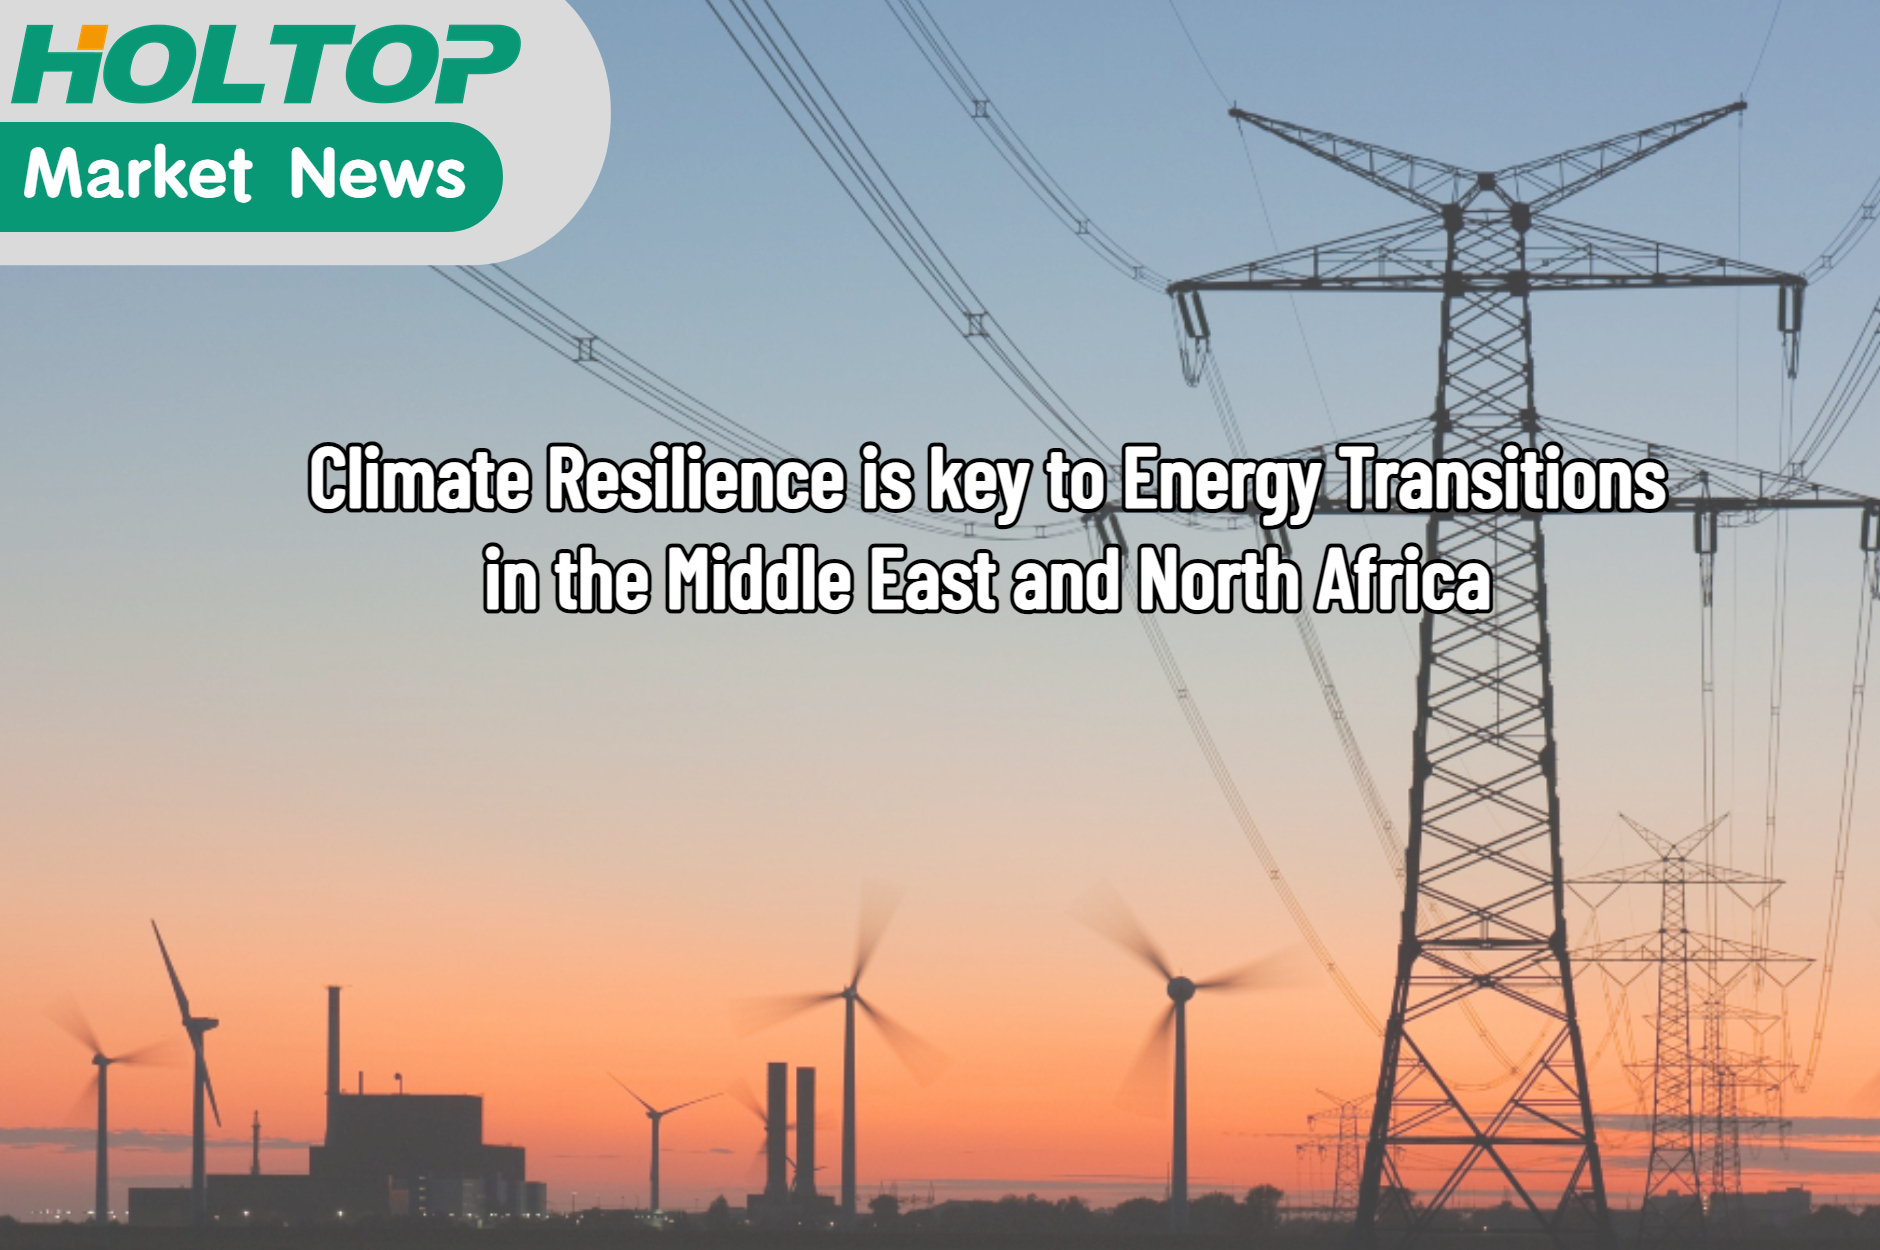 Climate Resilience is key to Energy Transitions in the MENA